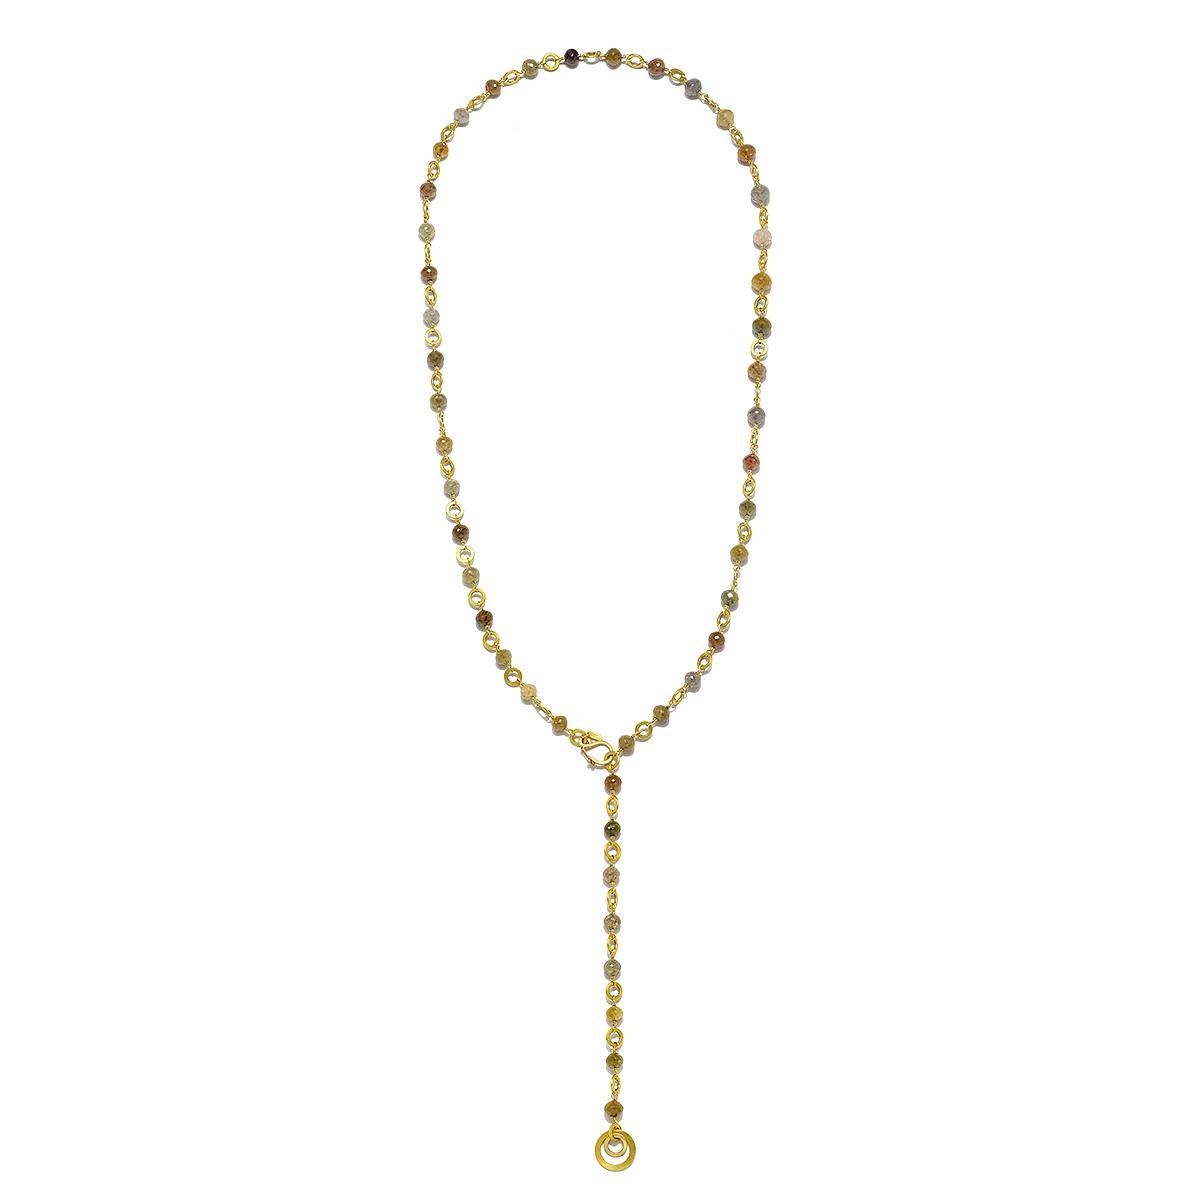 Rich in color, texture, and substance, this Faye Kim 18 Karat Gold Milky Diamond Necklace comprises milky diamond beads that are hand-wrapped in 18 karat gold with 18 karat gold links. Certain to be a conversation starter, this piece, with just the